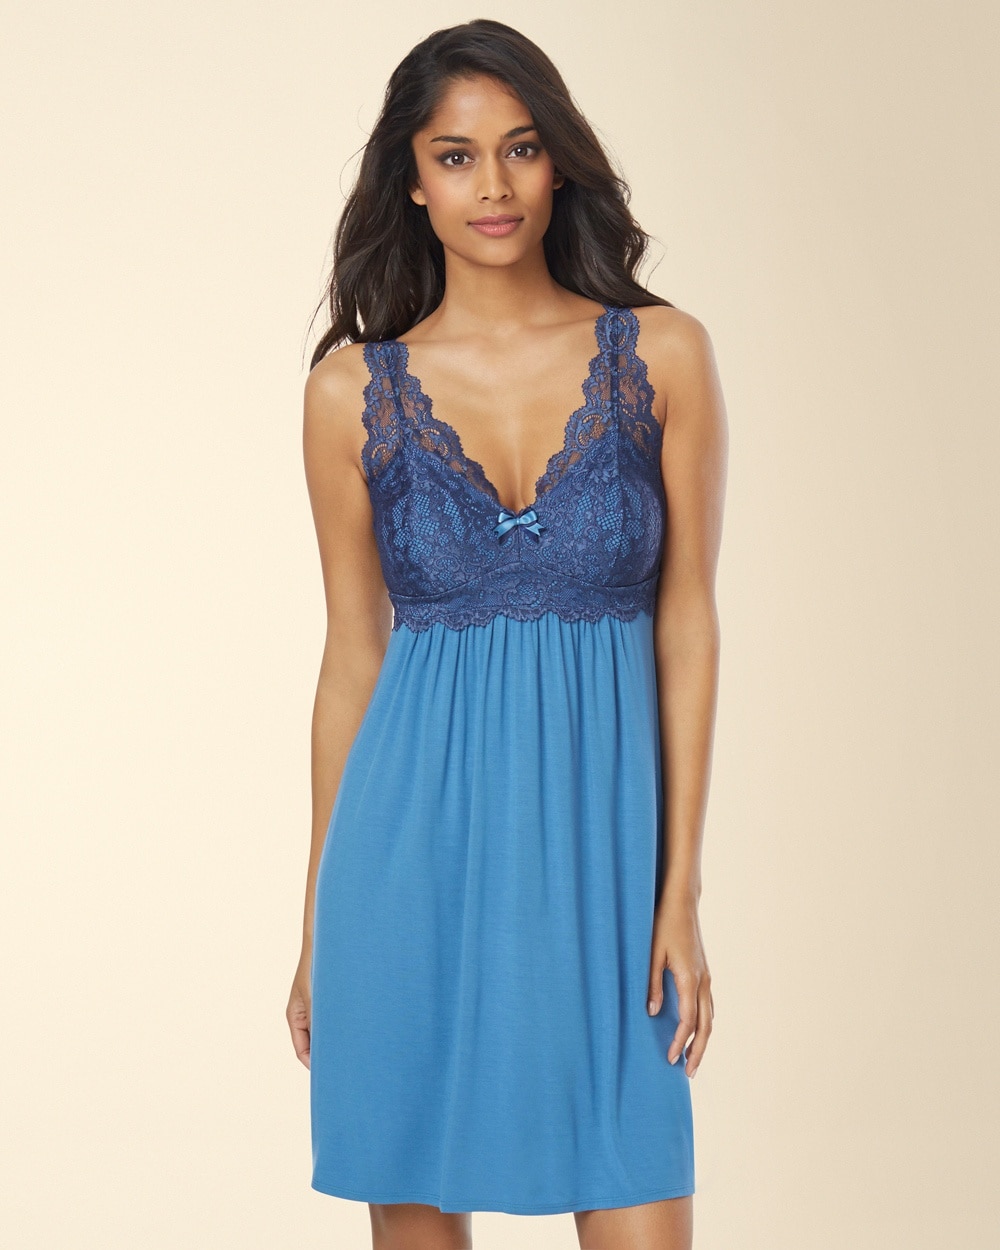 Floral Scroll Back Lace Sleep Chemise Indigo with Navy Lace